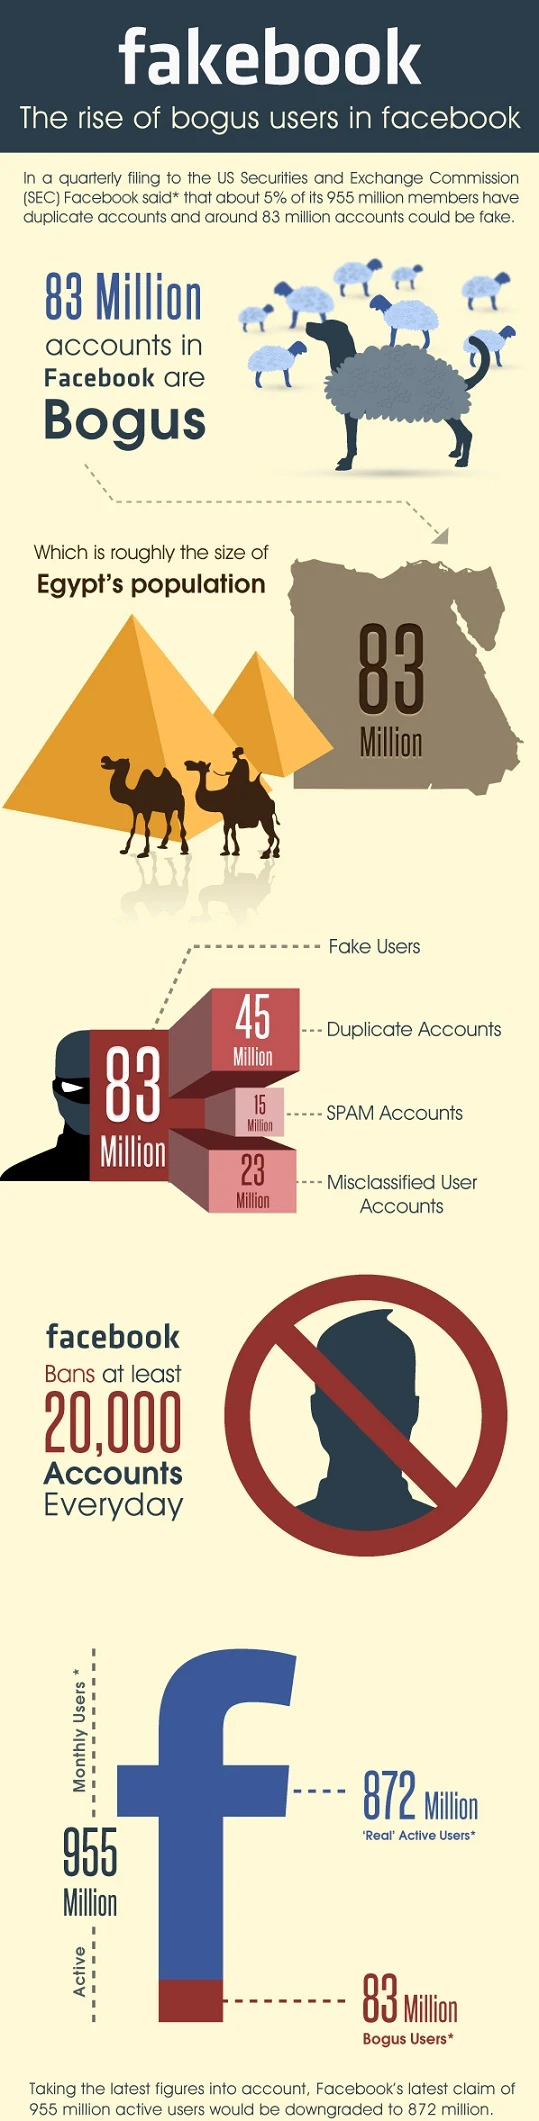 infographic about Facebook Detected 83 Million Bogus/fake Accounts 